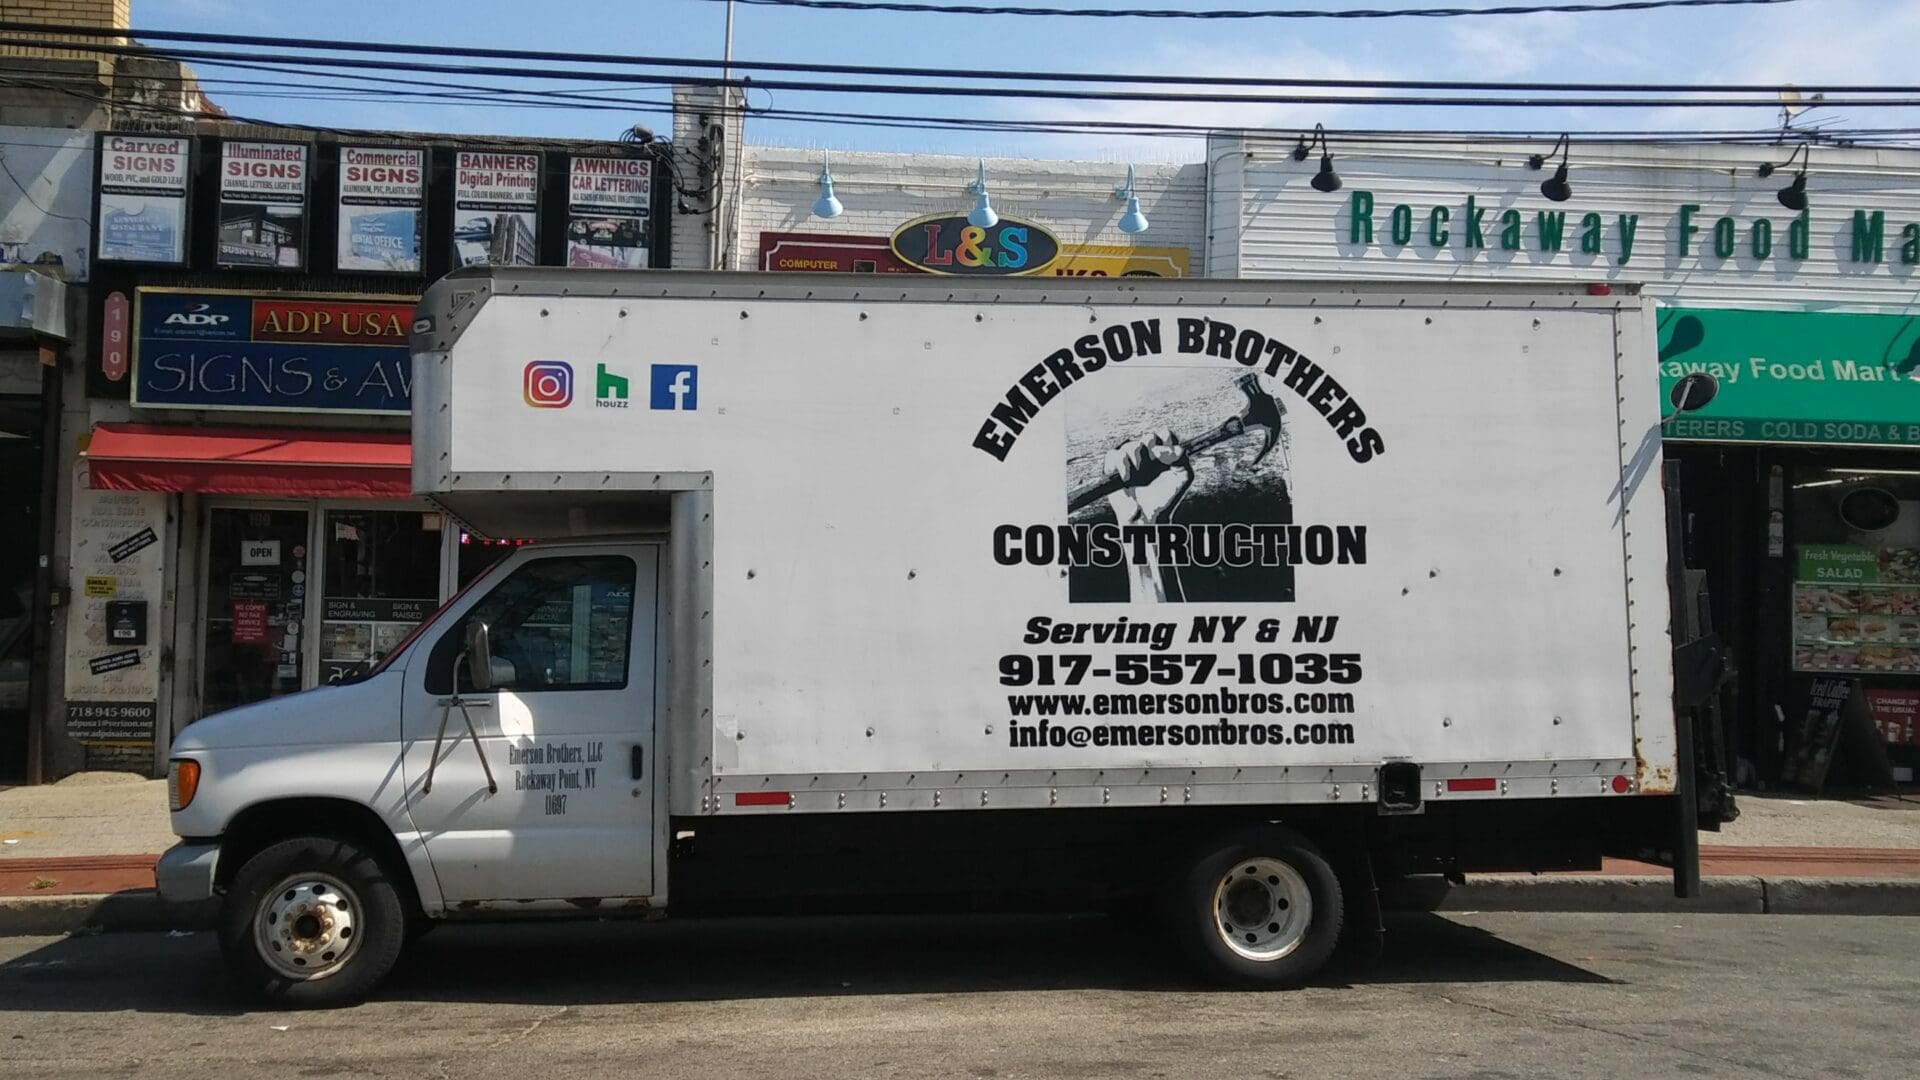 A white ADP USA Solutions Gallery truck parked on a street, with business contact details and logo on its side, in front of a row of small shops.